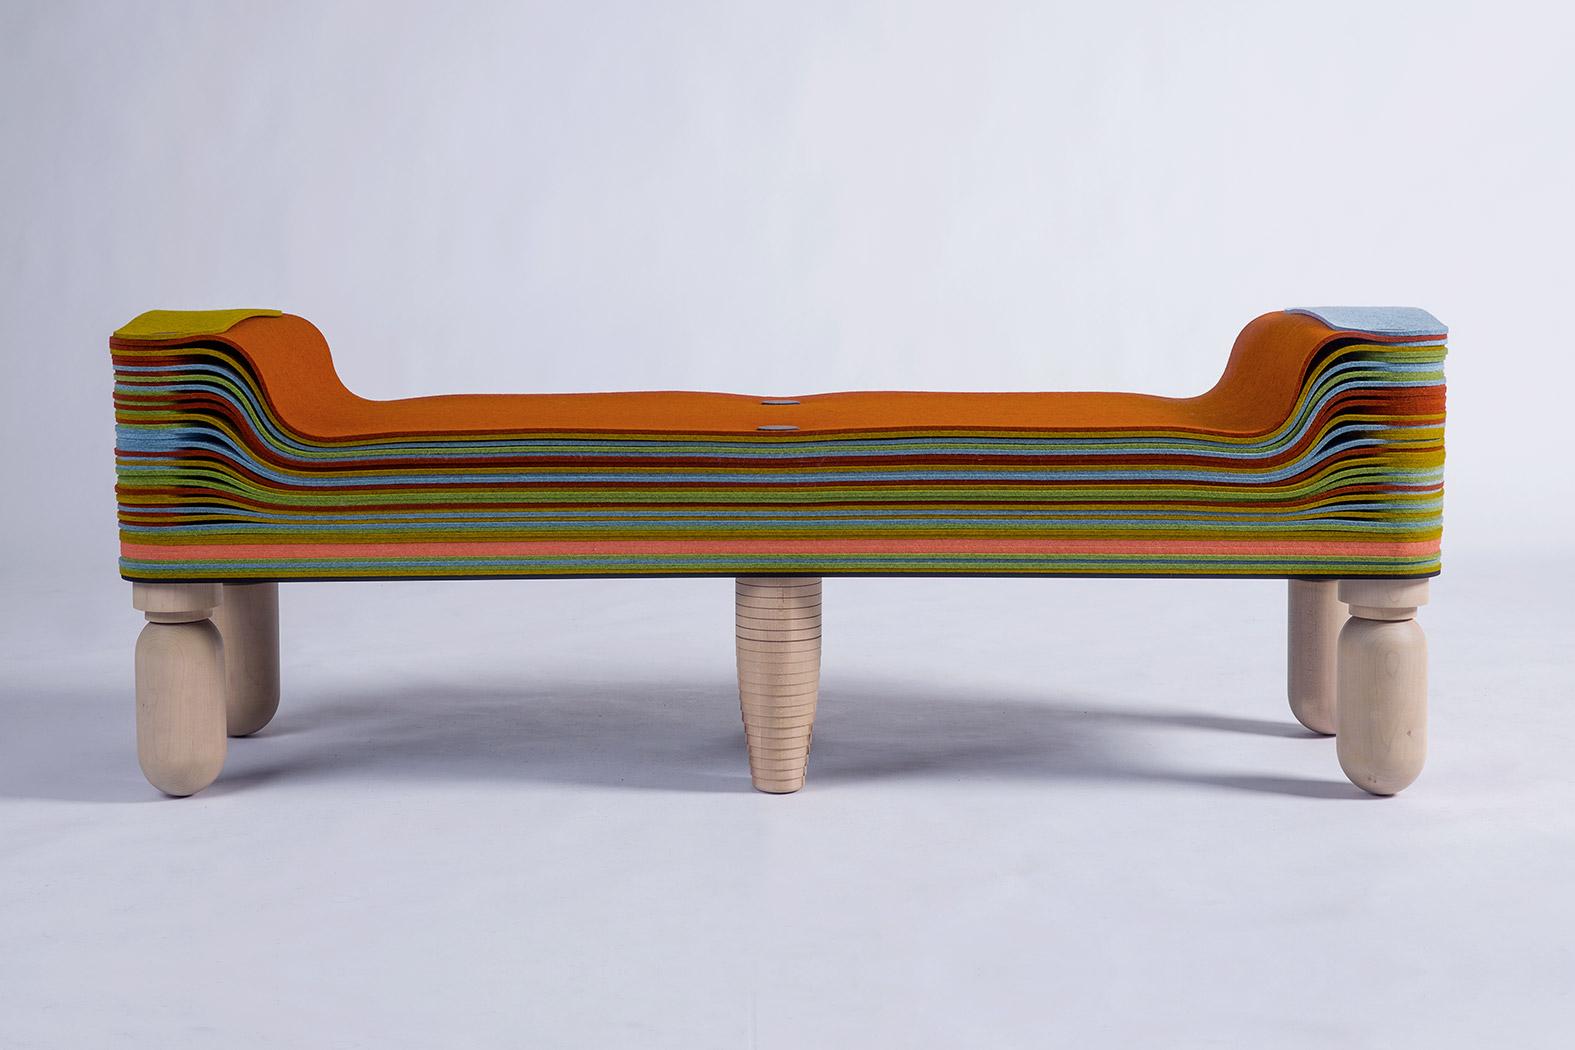 Contemporary Maxine B, Felt and Wood Bench, Benoist F. Drut in STACKABL, Canada, 2021 For Sale